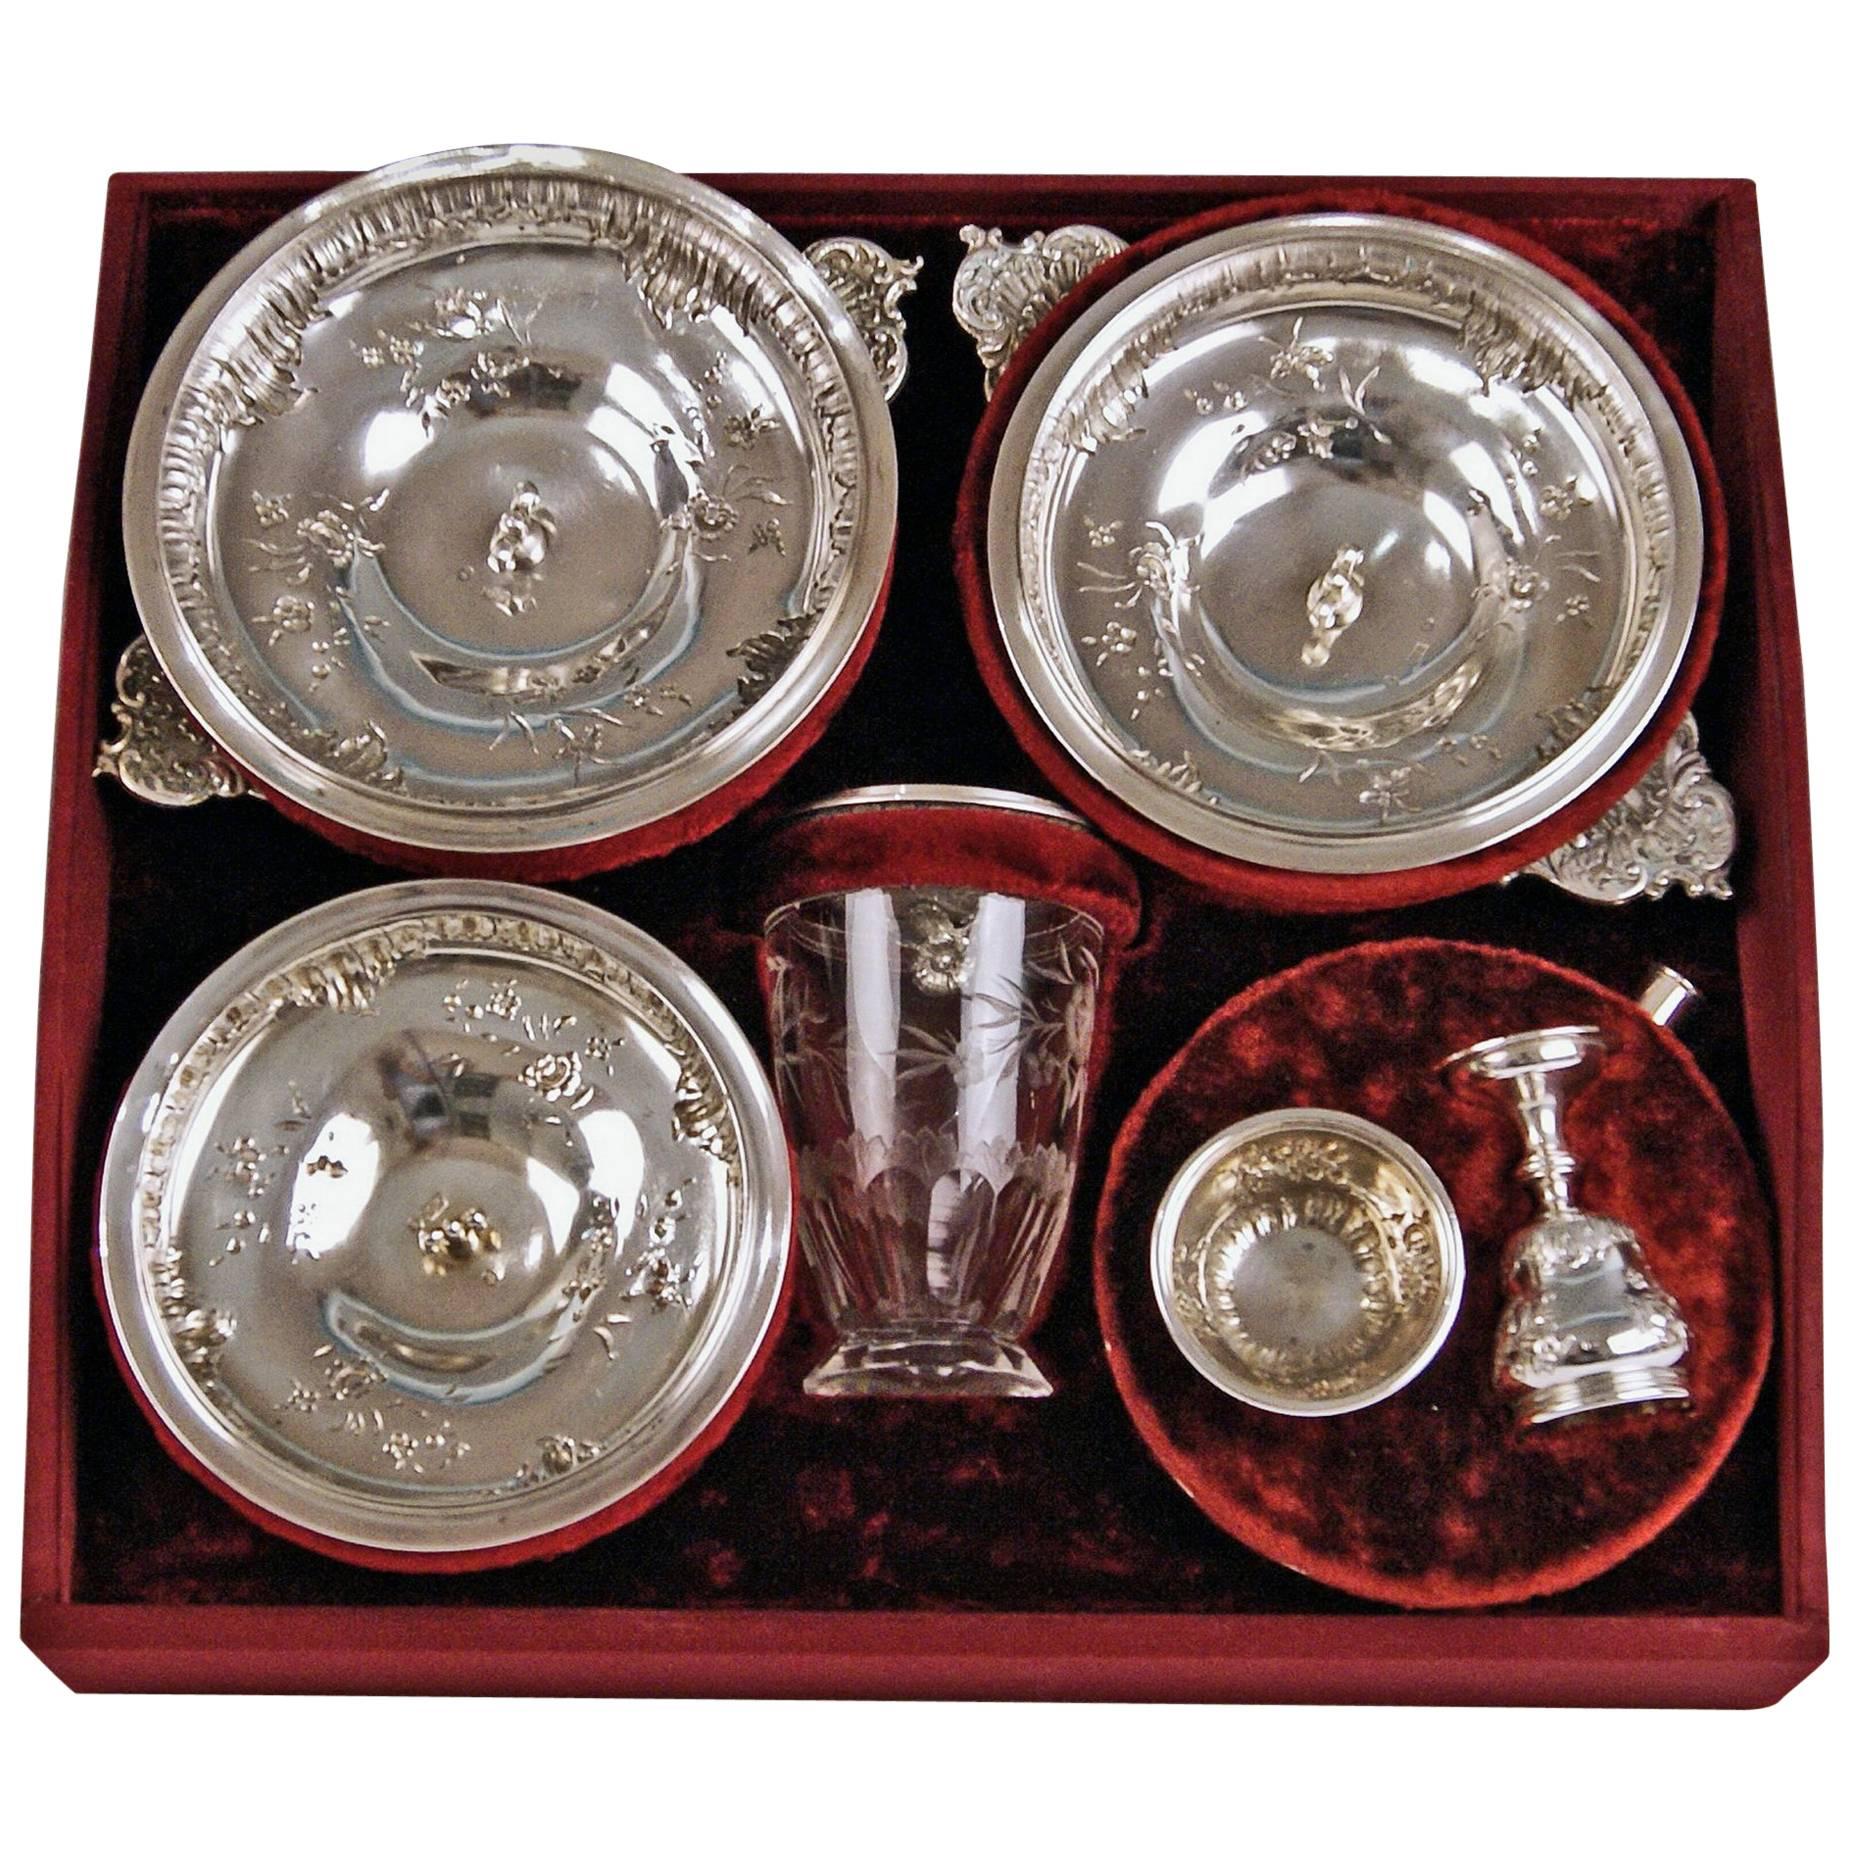 Silver Austrian gorgeous travelling set of dishes and flatware / of most elegant appearance.

Particular feature:
One-off production / special design in original casket, once having owned by Countess Wanda Antonia von Sandizell – Lamberg (1867 –